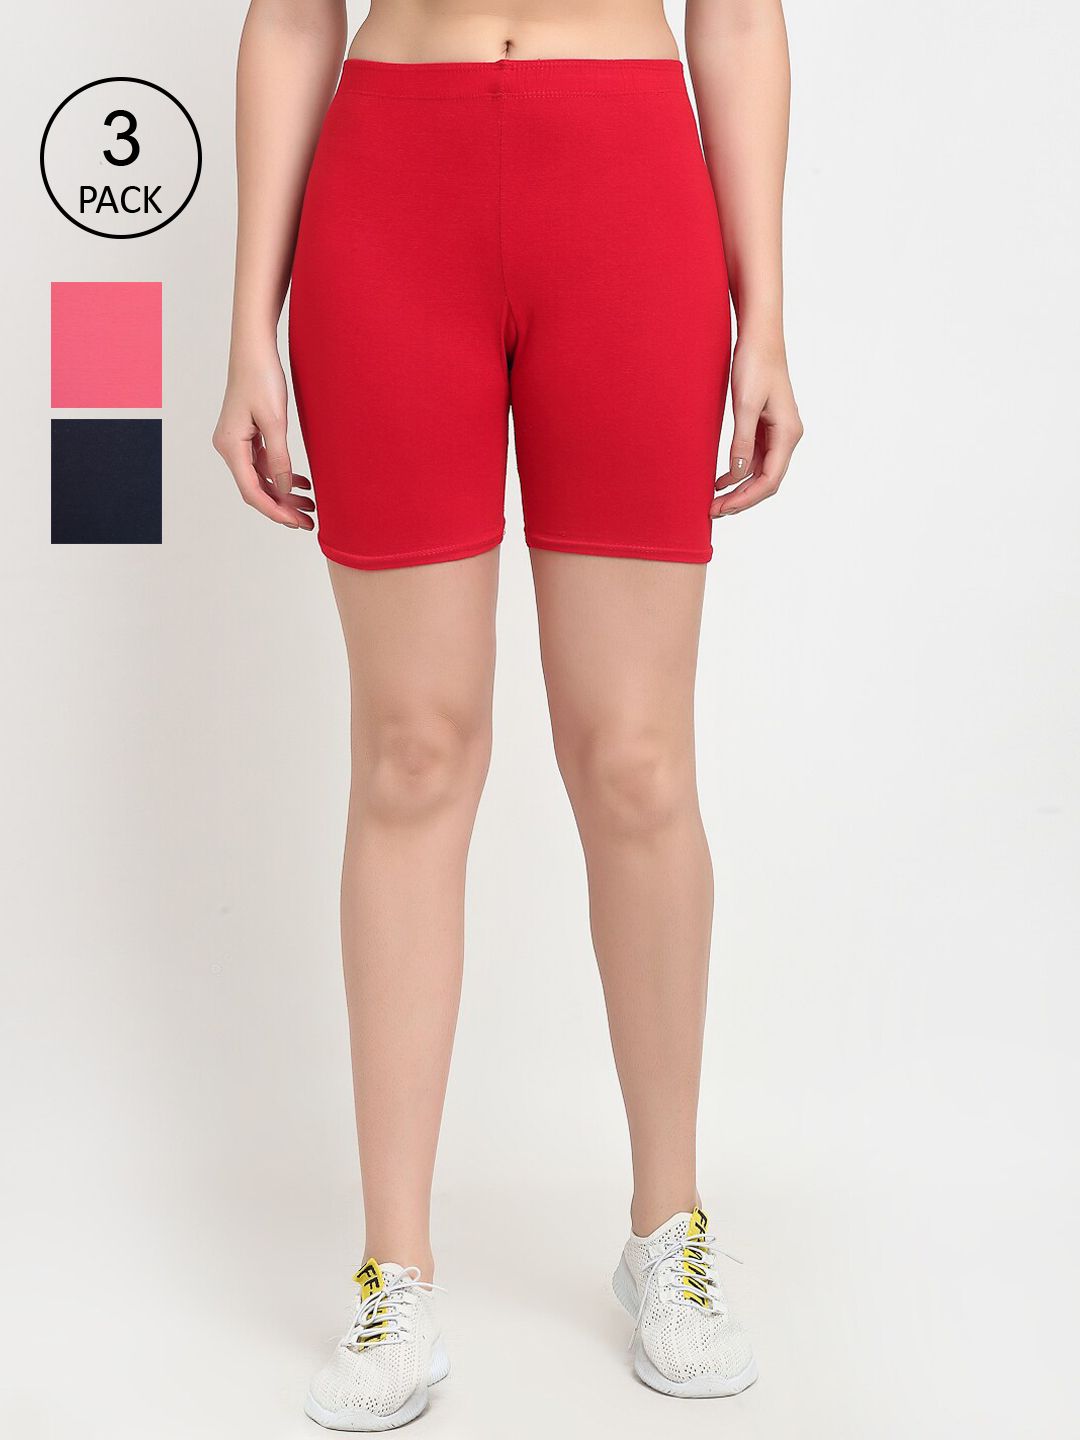 GRACIT Women Red Colourblocked Cycling Sports Shorts Price in India